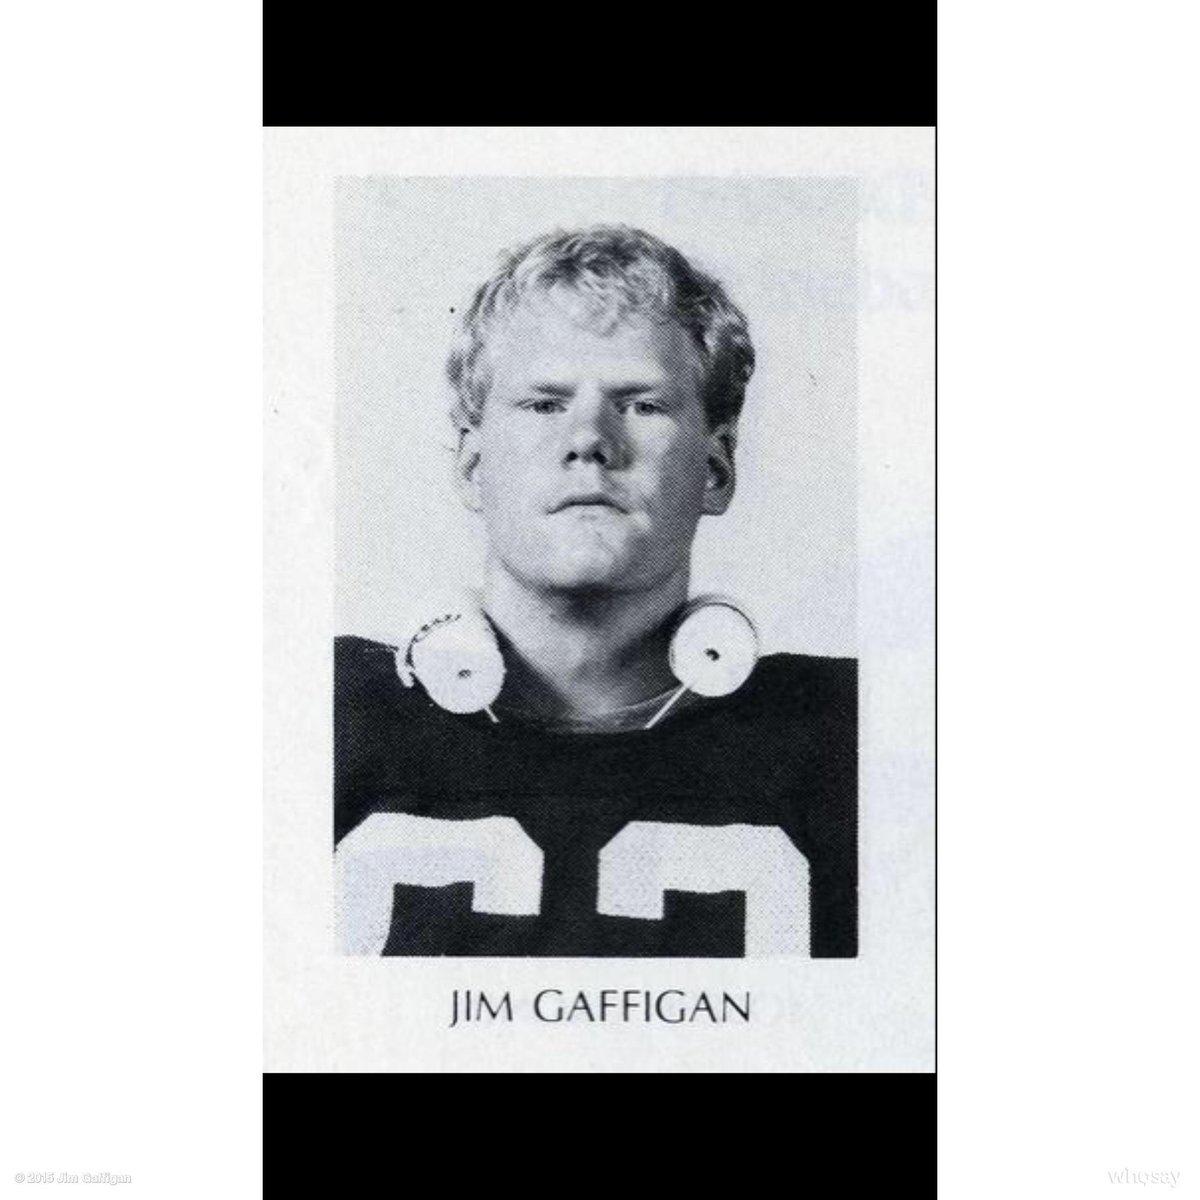 Jim Gaffigan was a star football player in high school and played at @Purdue & @Georgetown. #InterestingFacts @JimGaffigan #dontjudgeabookbyitscover #wellmaybealittle https://t.co/BFQv6pbOkY